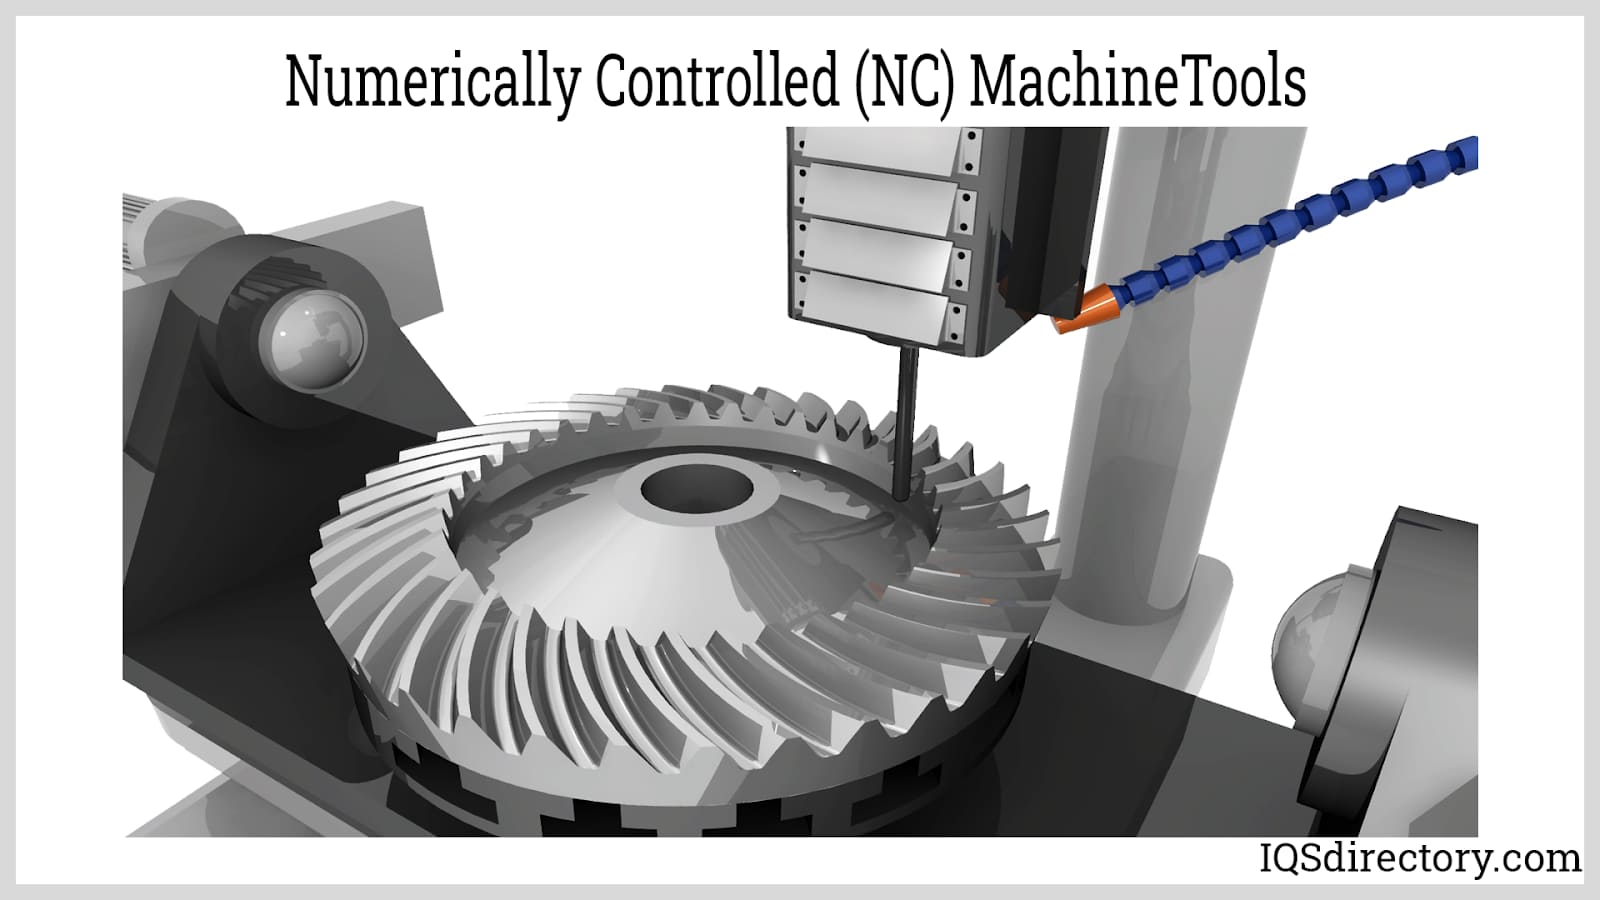 Numerically controlled (NC) machine tools